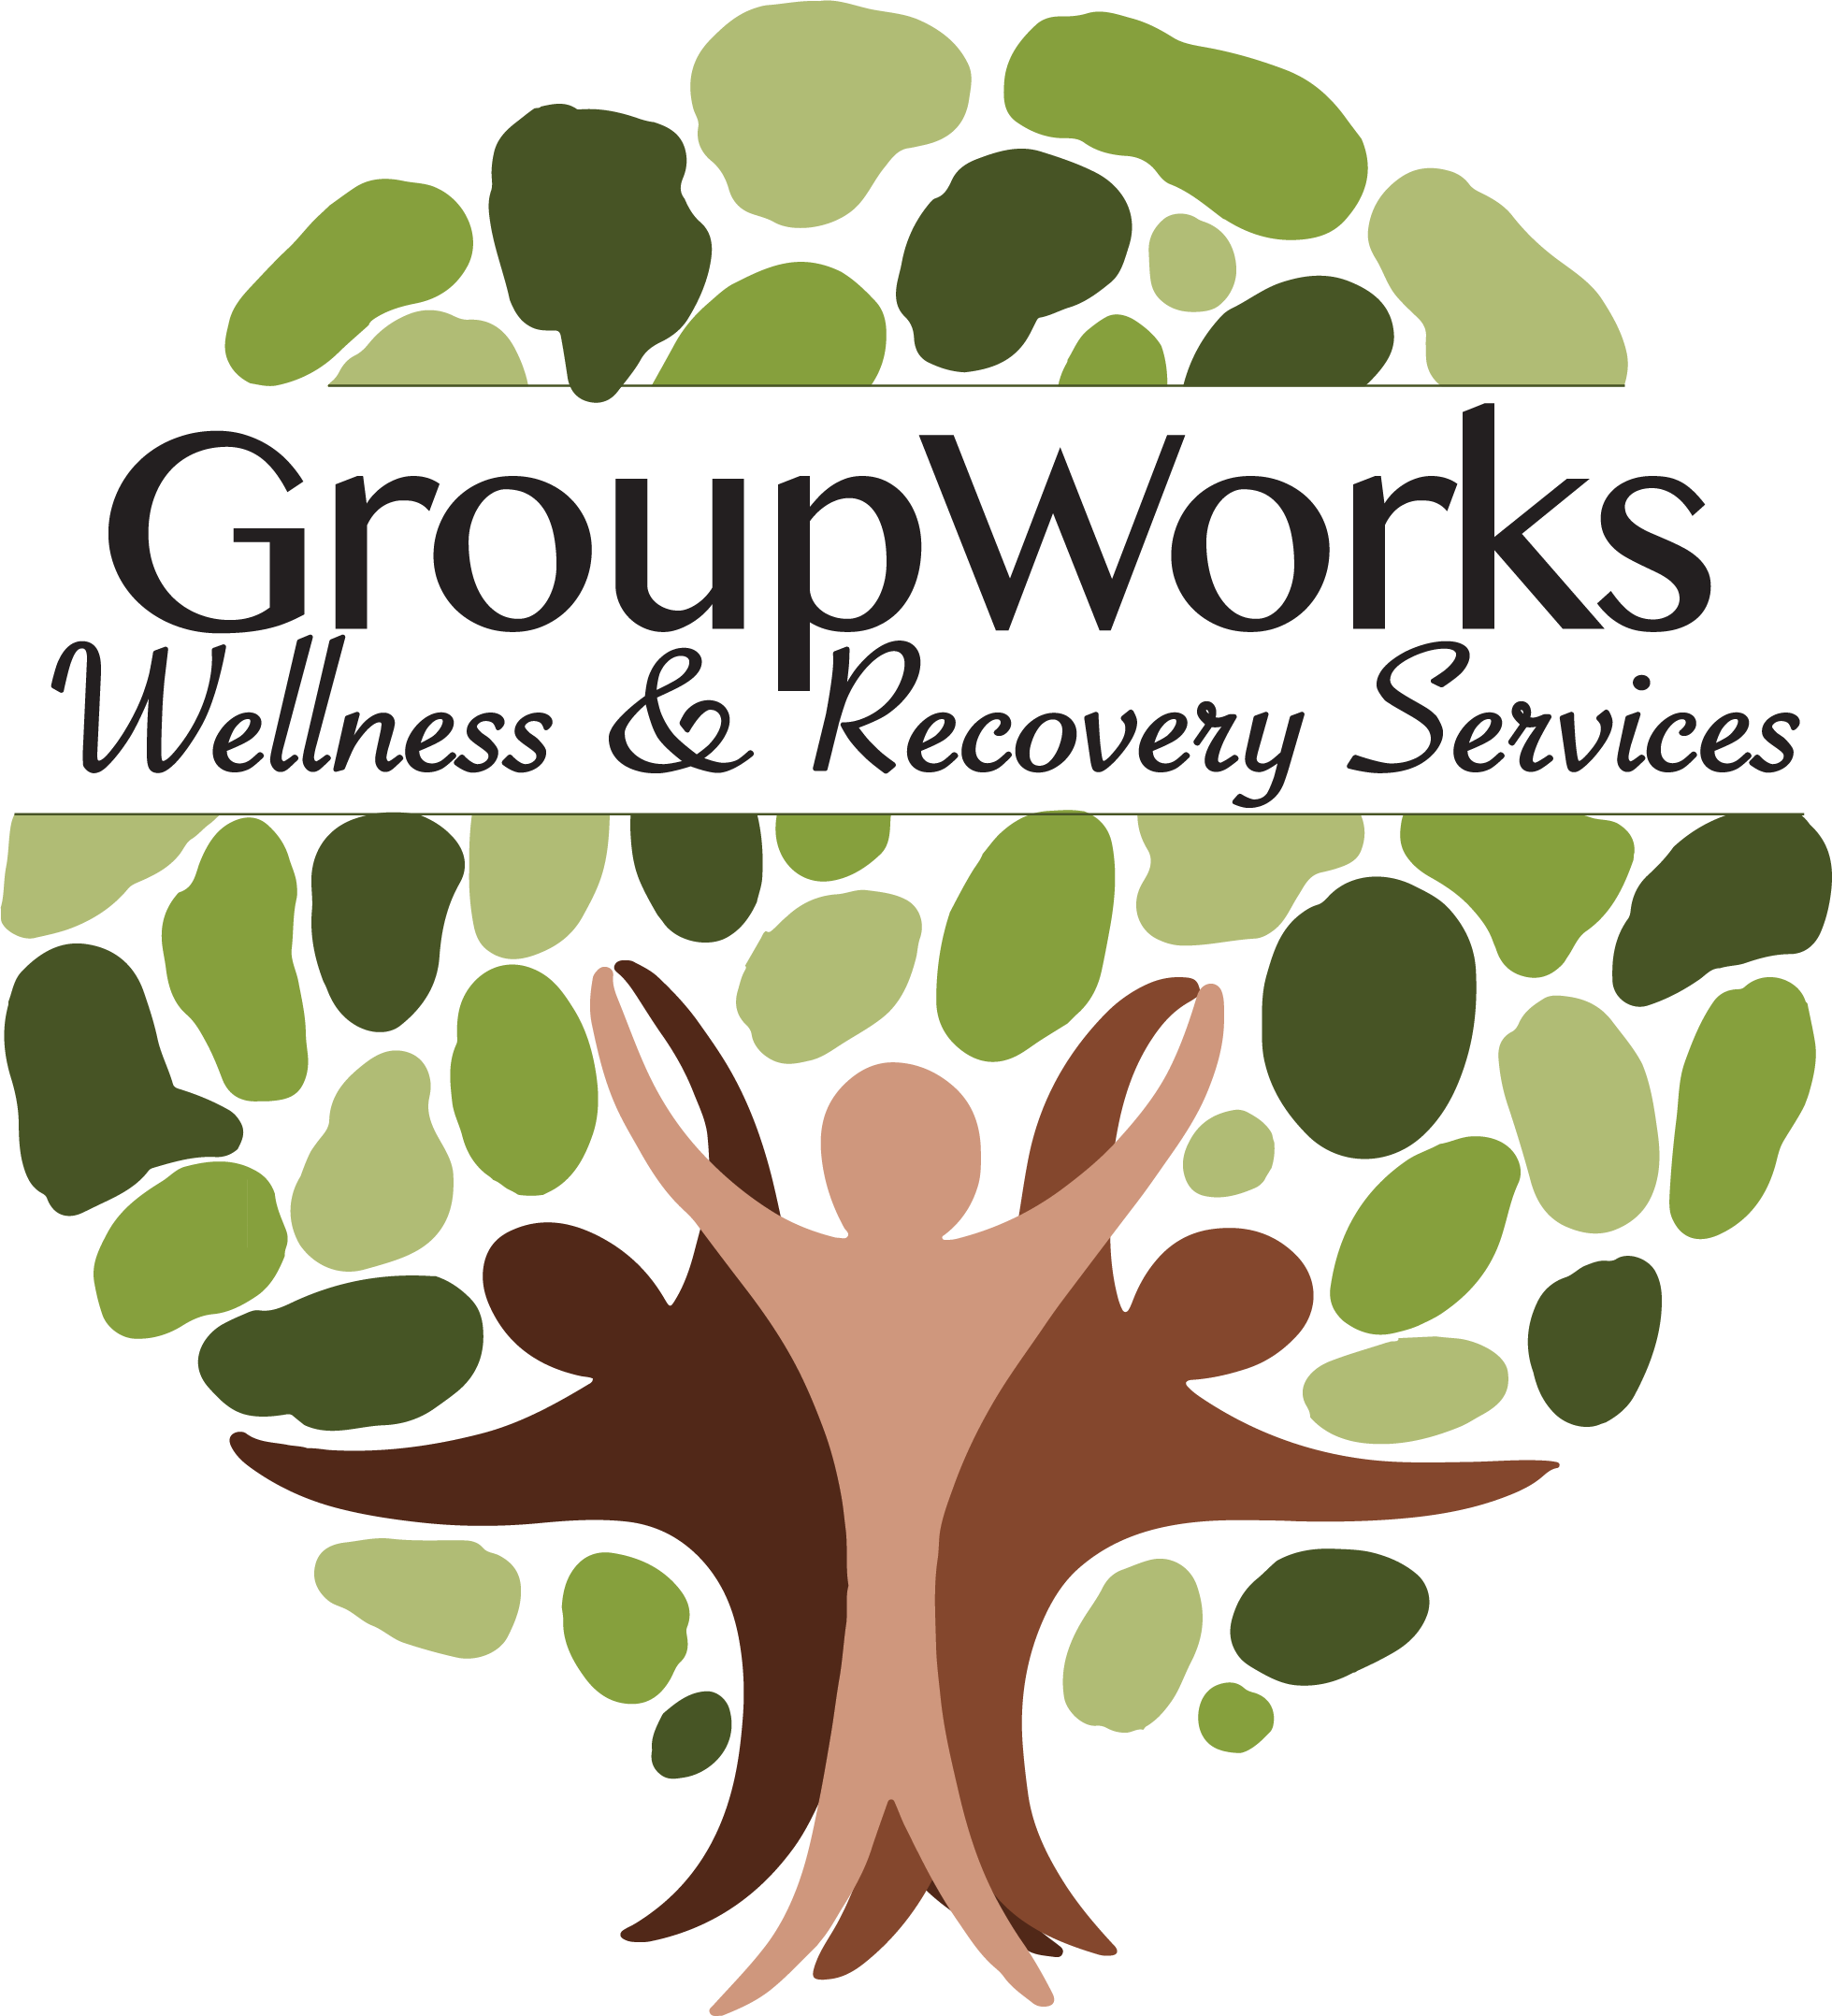 GroupWorks Wellness & Recovery Services Logo